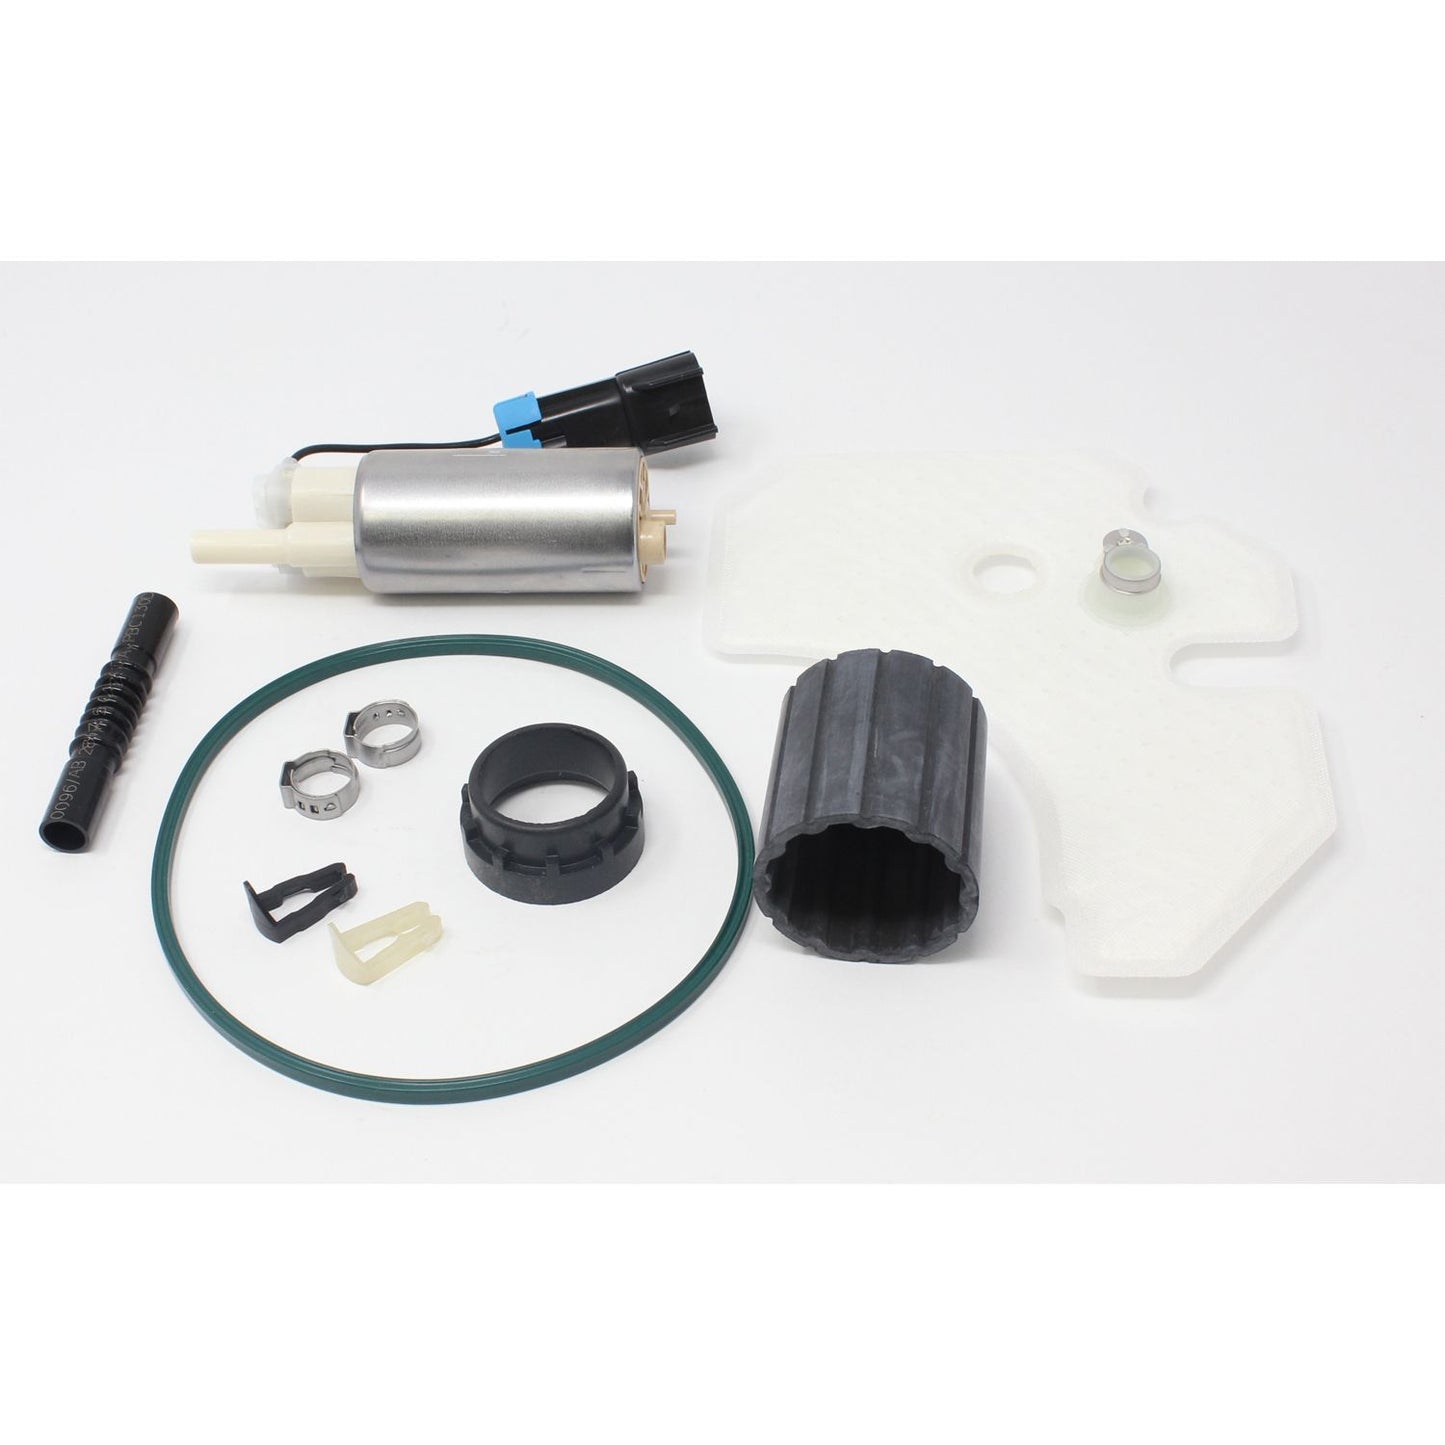 TI Automotive Stock Replacement Pump and Installation Kit for Gasoline Applications TCA931